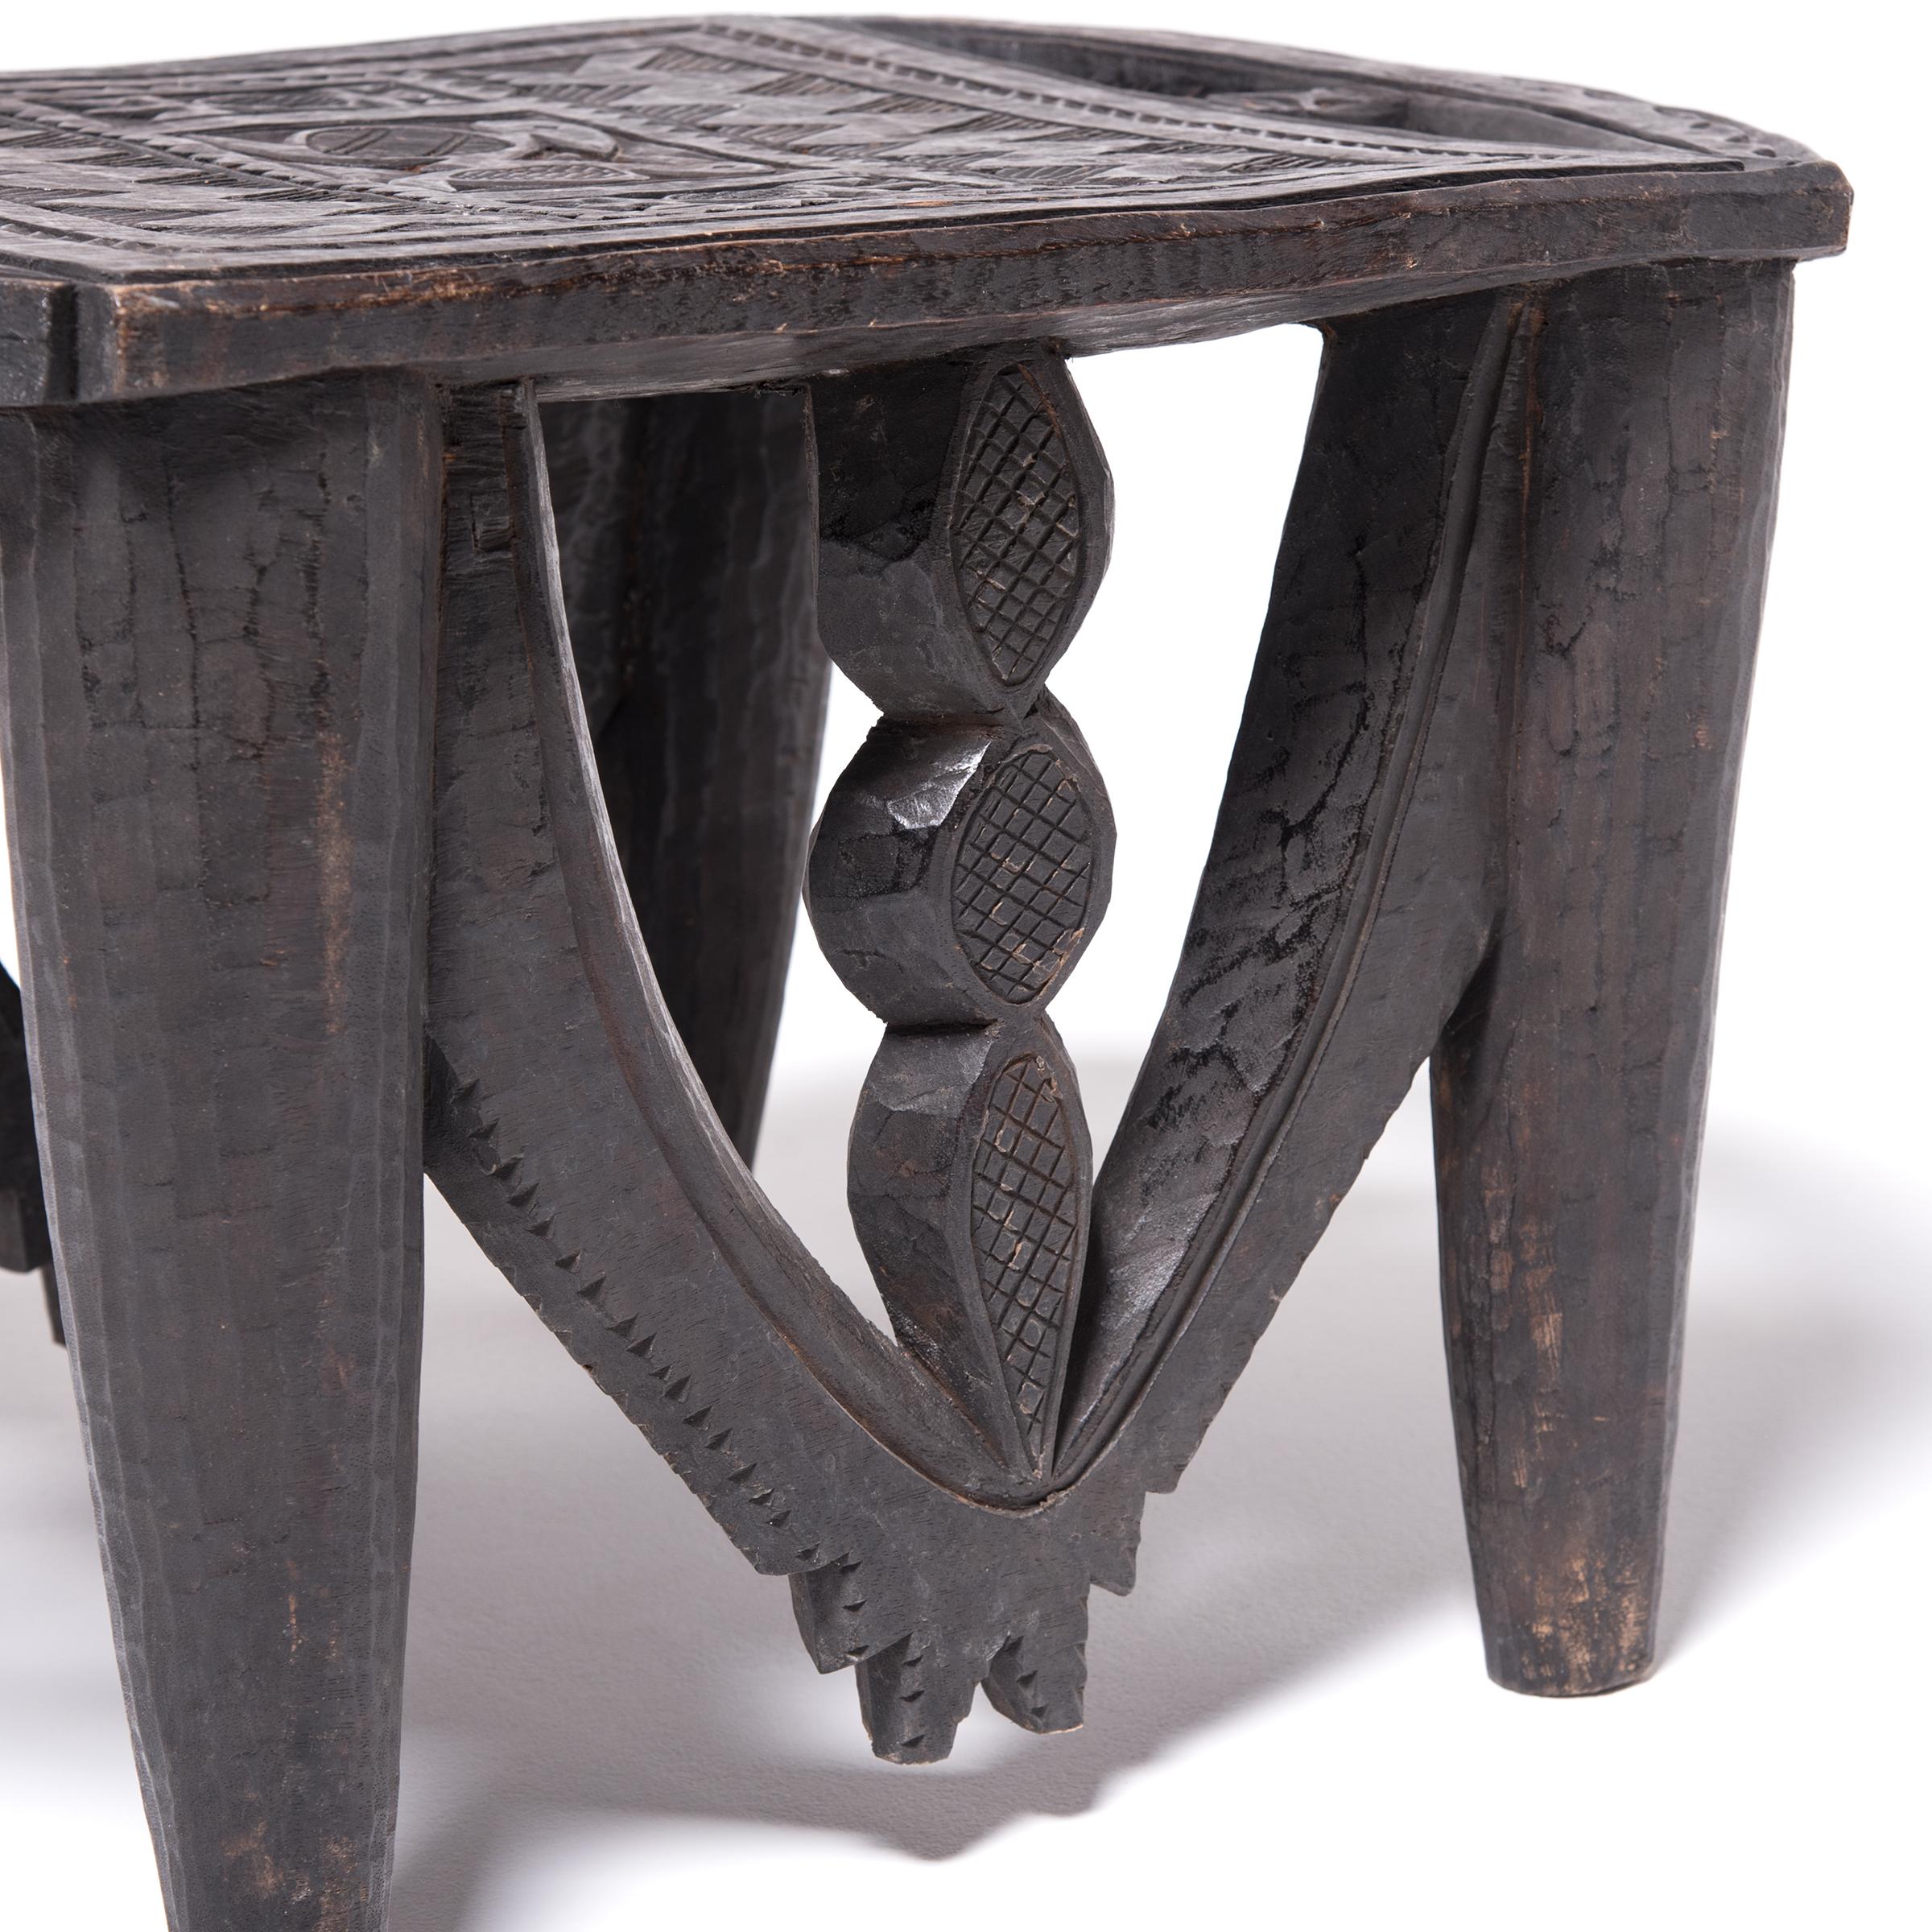 Early 20th Century Nigerian Nupe Stool with Animal Motifs 1